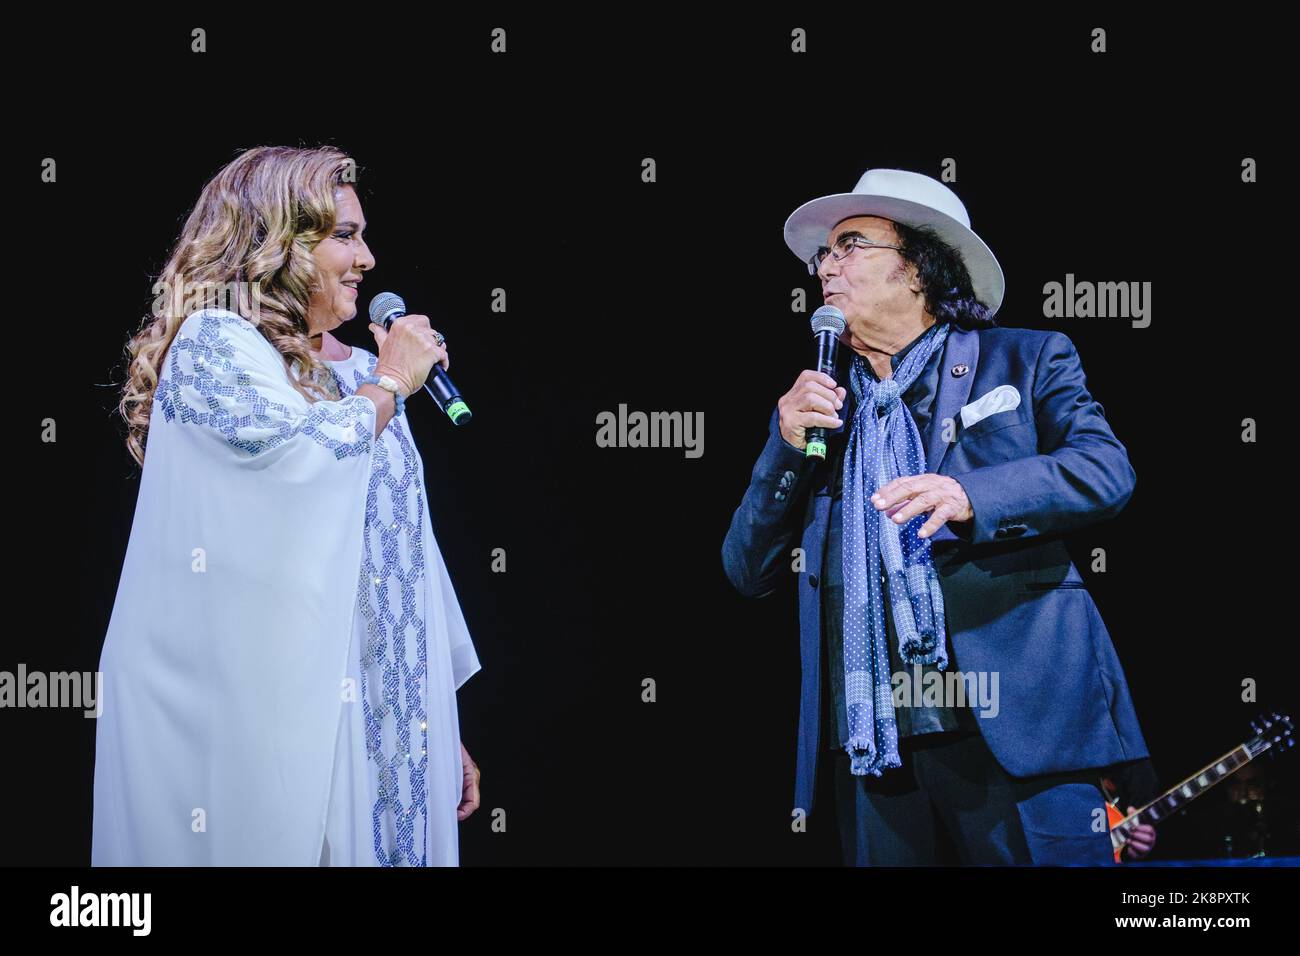 Zurich, Switzerland. 22nd, October 2022. The Italian-American pop duo Al Bano and Romina Power performs a live concert at La Notte Italiana show at the Hallenstadion in Zürich. Here singer Romina Power (L) is seen live on stage with singer Al Bano (R). (Photo credit: Gonzales Photo - Tilman Jentzsch). Stock Photo